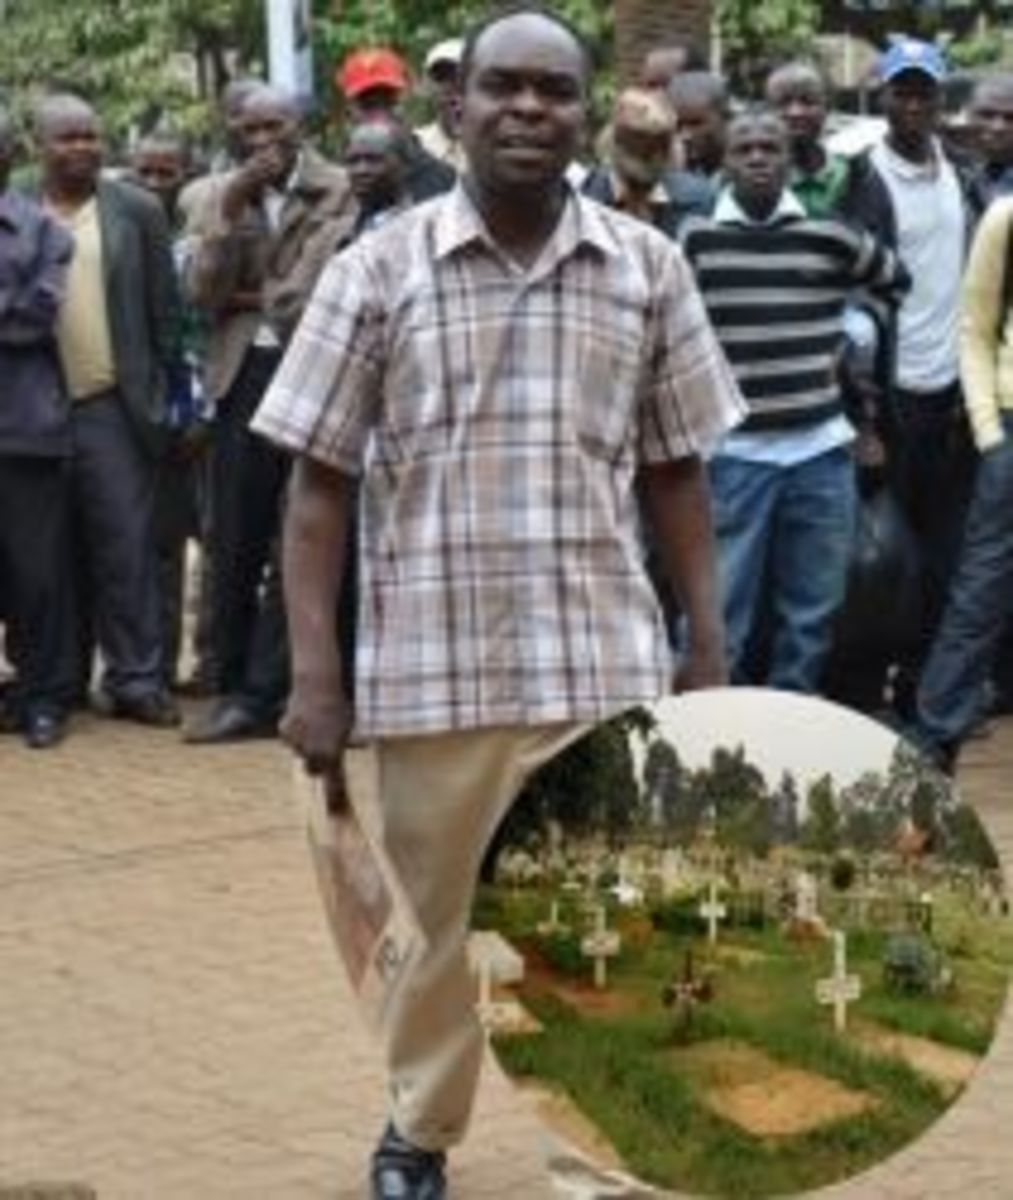 I hated my life as a grave robber - John Kibera, the street pastor who once loved robbing the dead